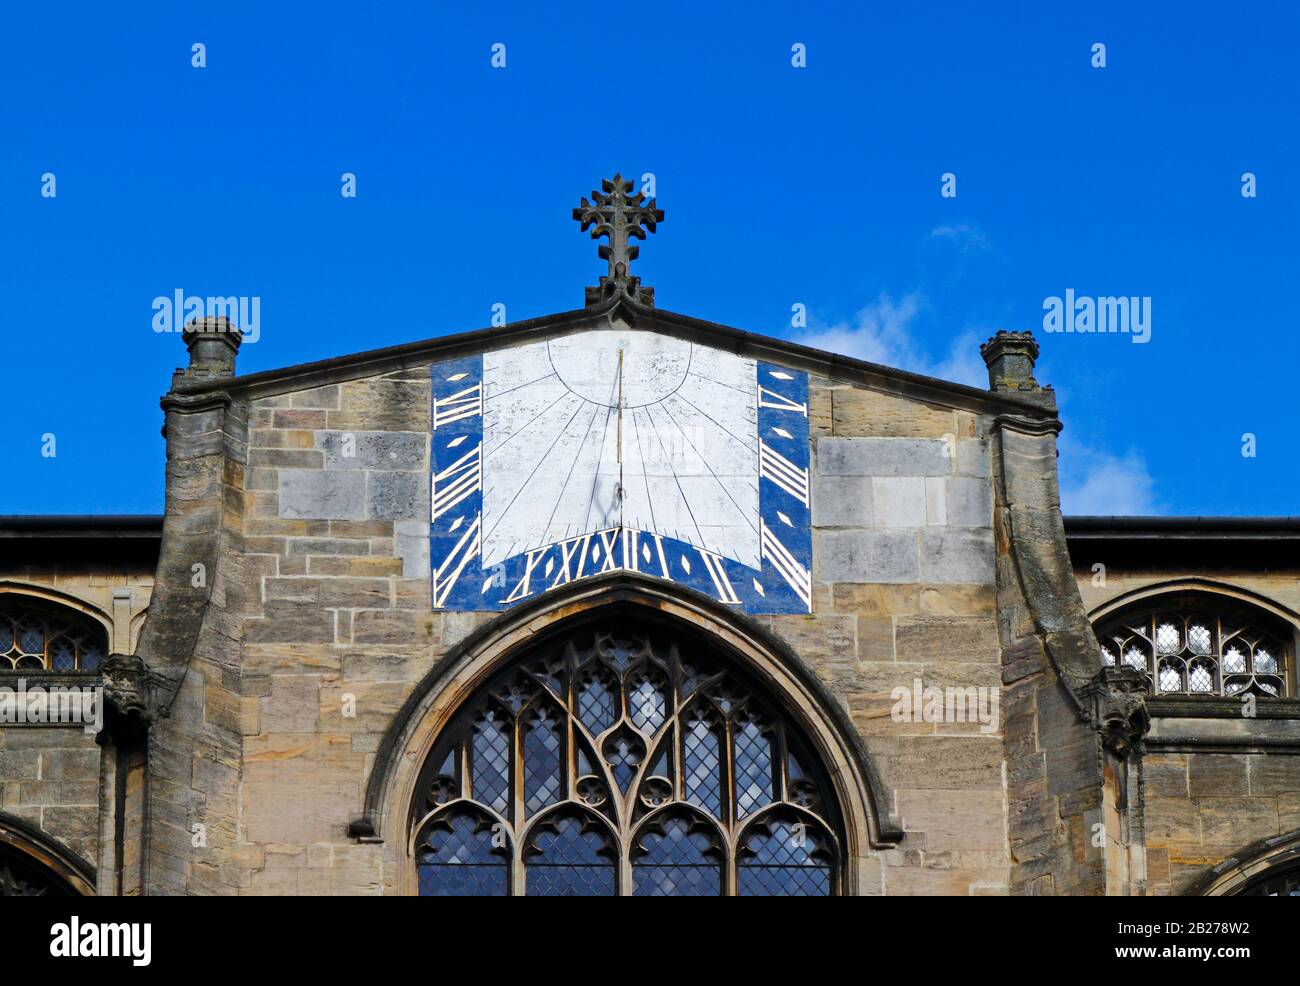 A view of the sundial at the Church of St Peter Mancroft in the centre of the City of Norwich, Norfolk, England, United Kingdom, Europe. Stock Photo